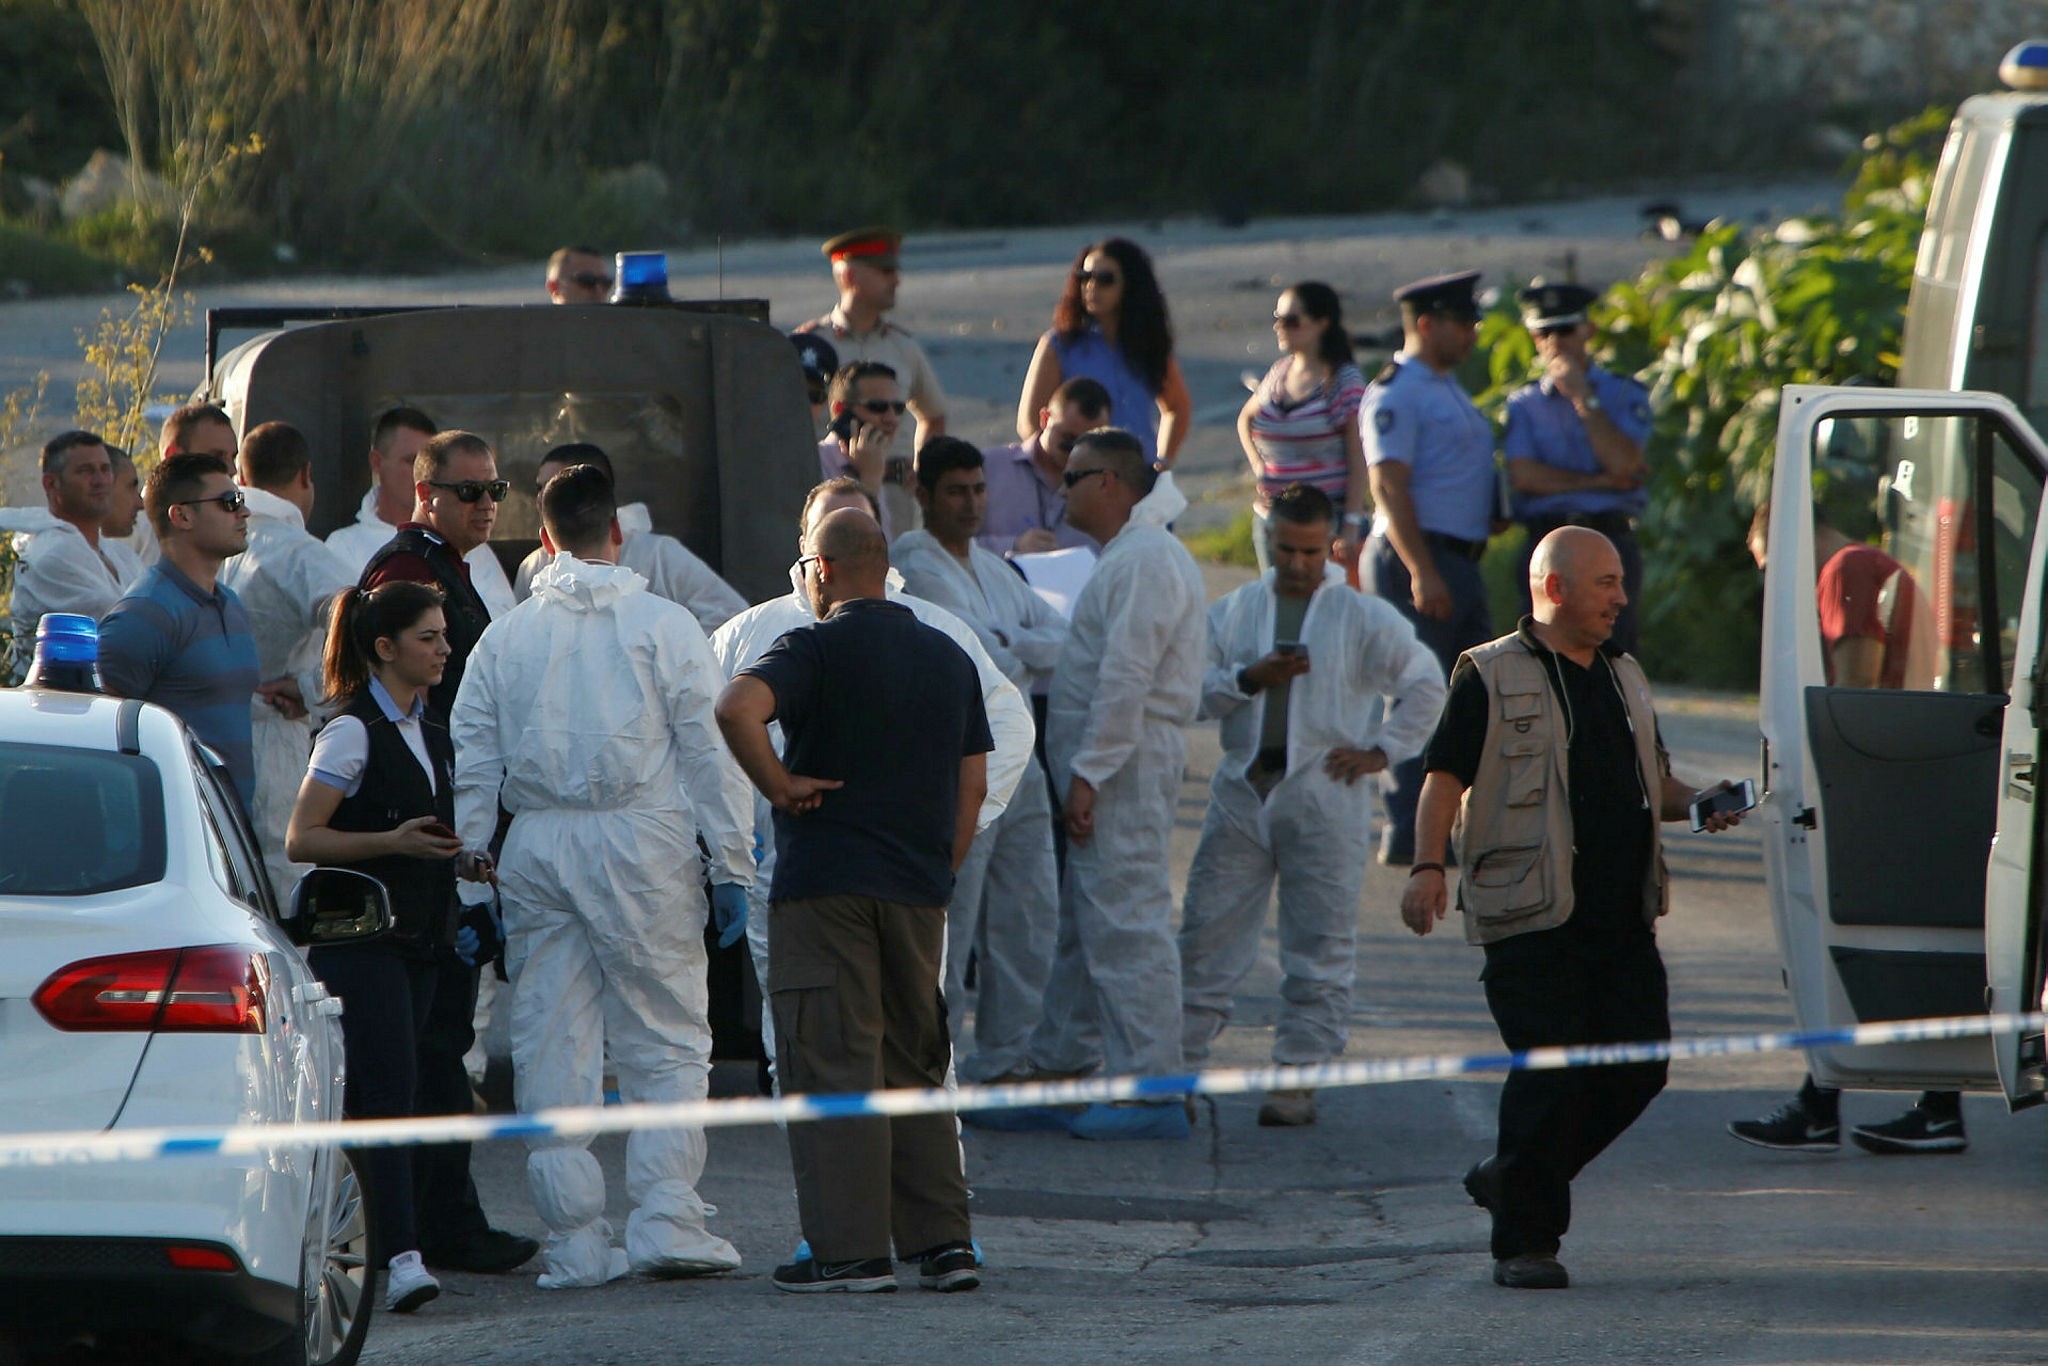 Police and forensics experts stand behind a road block after a powerful bomb blew up a car killing investigative journalist Daphne Caruana Galizia in Bidnija, Malta, October 16, 2017. (Reuters Photo)